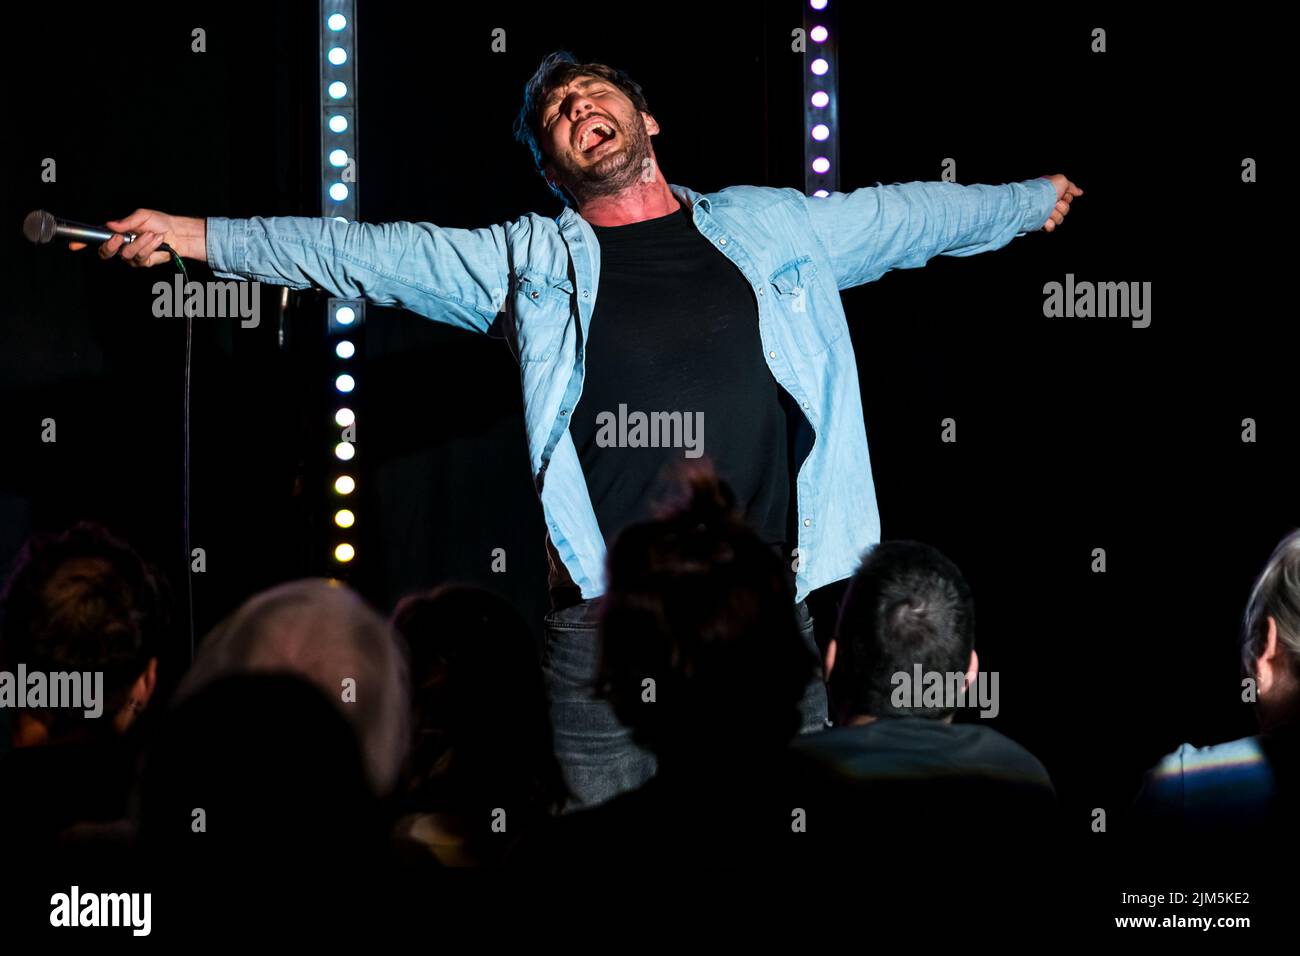 Edinburgh, Scotland, United Kingdom, 4th August 2022. Edinburgh Festival Fringe: The Stand Comedy Club presents a showcase of the comedic talent on offer at this year's Fringe at the New Town Theatre. Pictured: Sean Walsh.  Credit: Sally Anderson/Alamy Live News Stock Photo